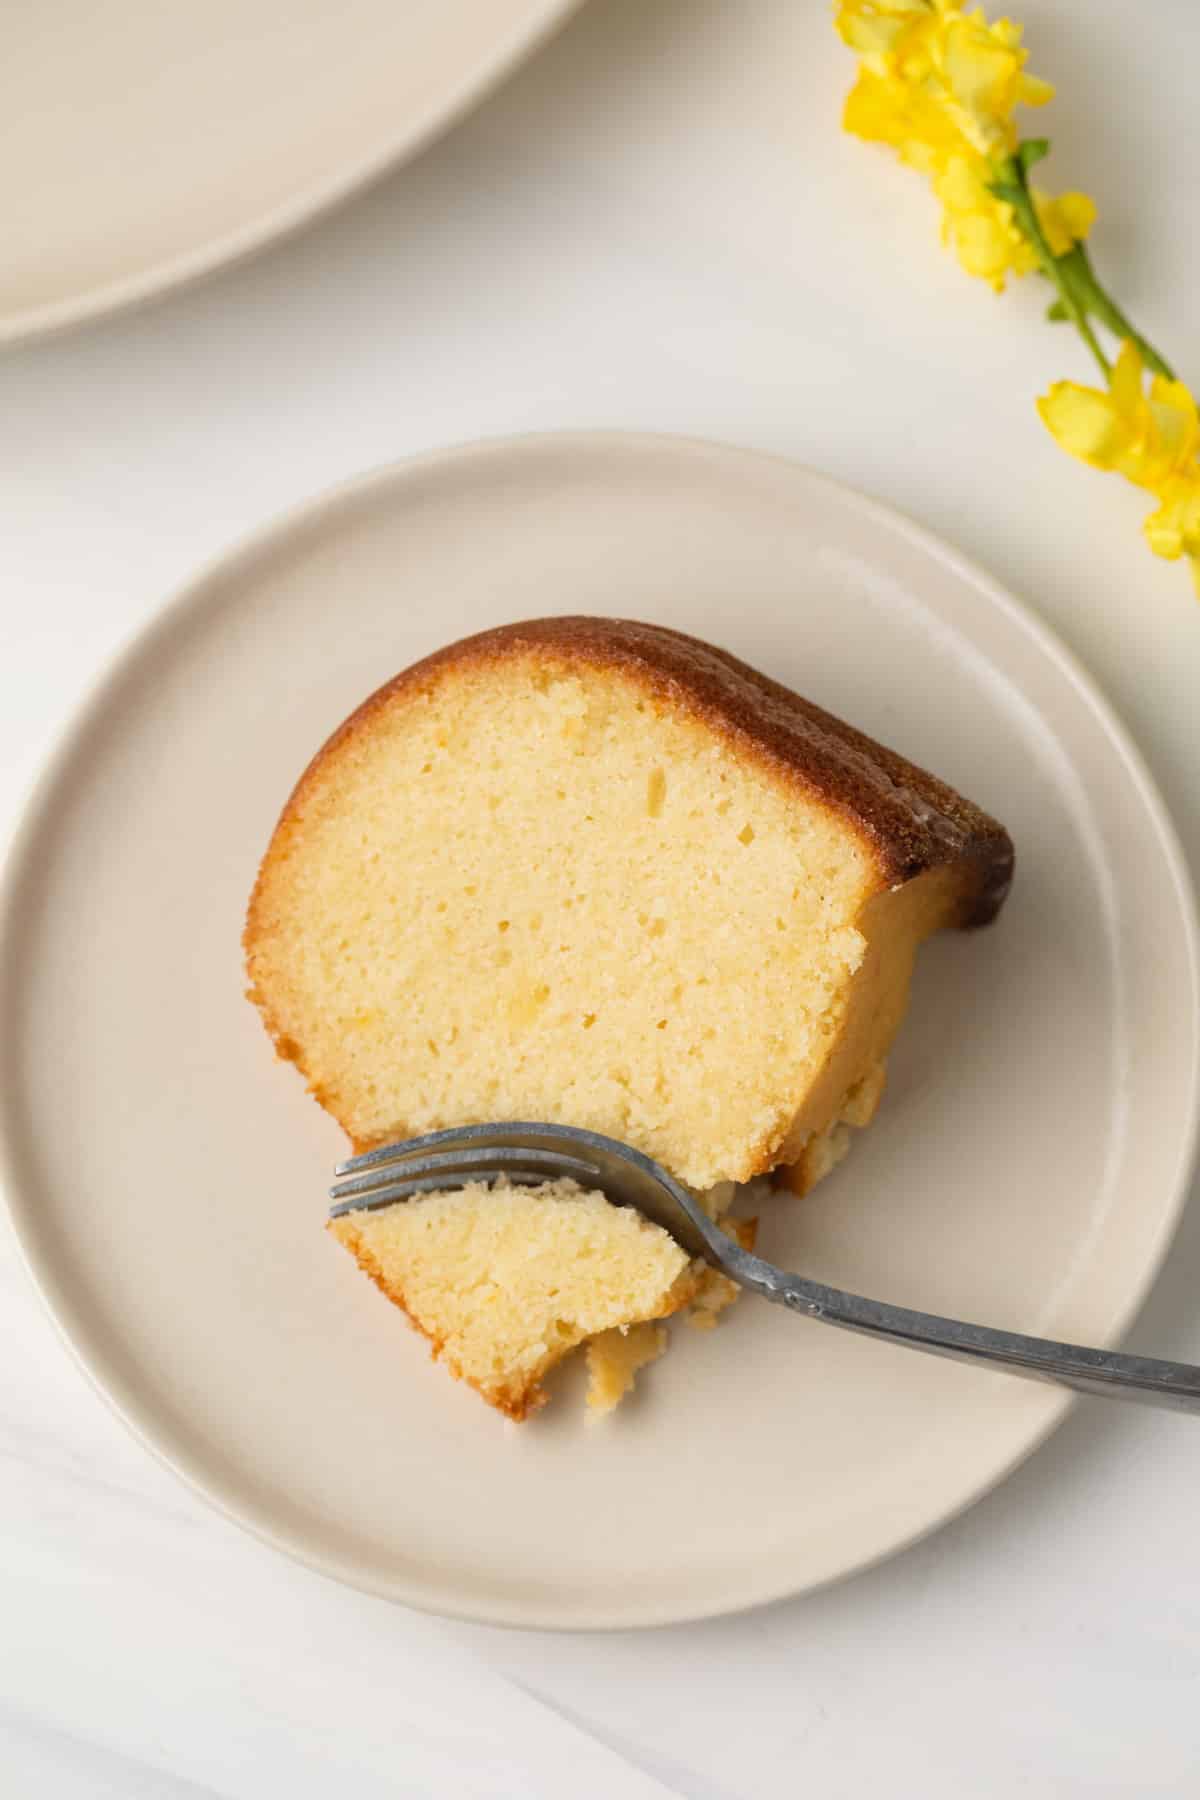 Slice of lemon pound cake with fork taking a bite out.